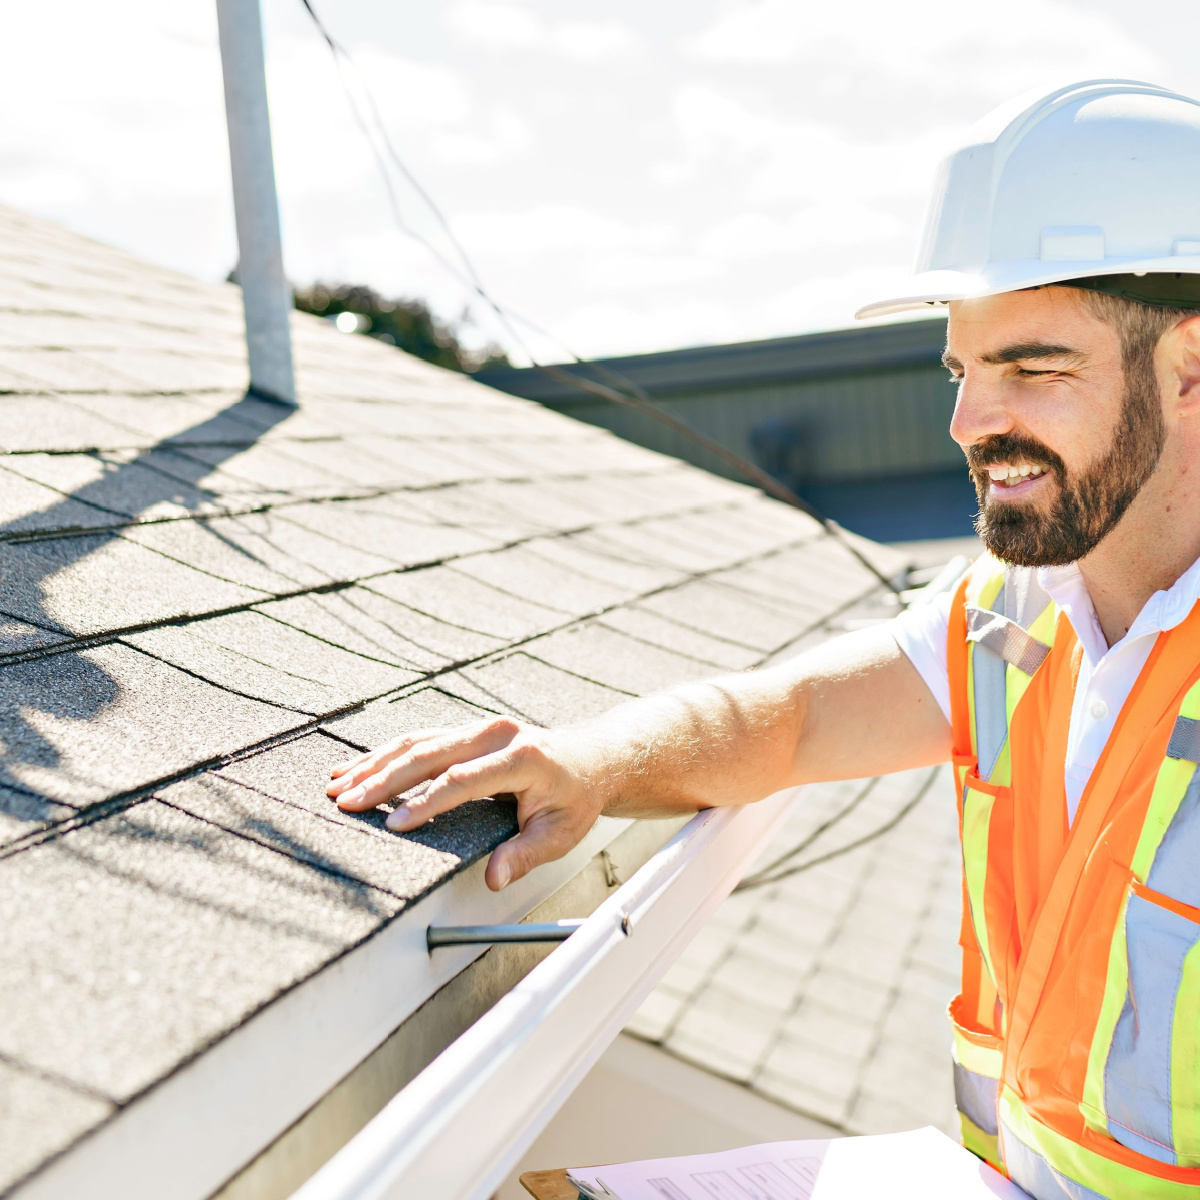 A roofer inspecting a roof